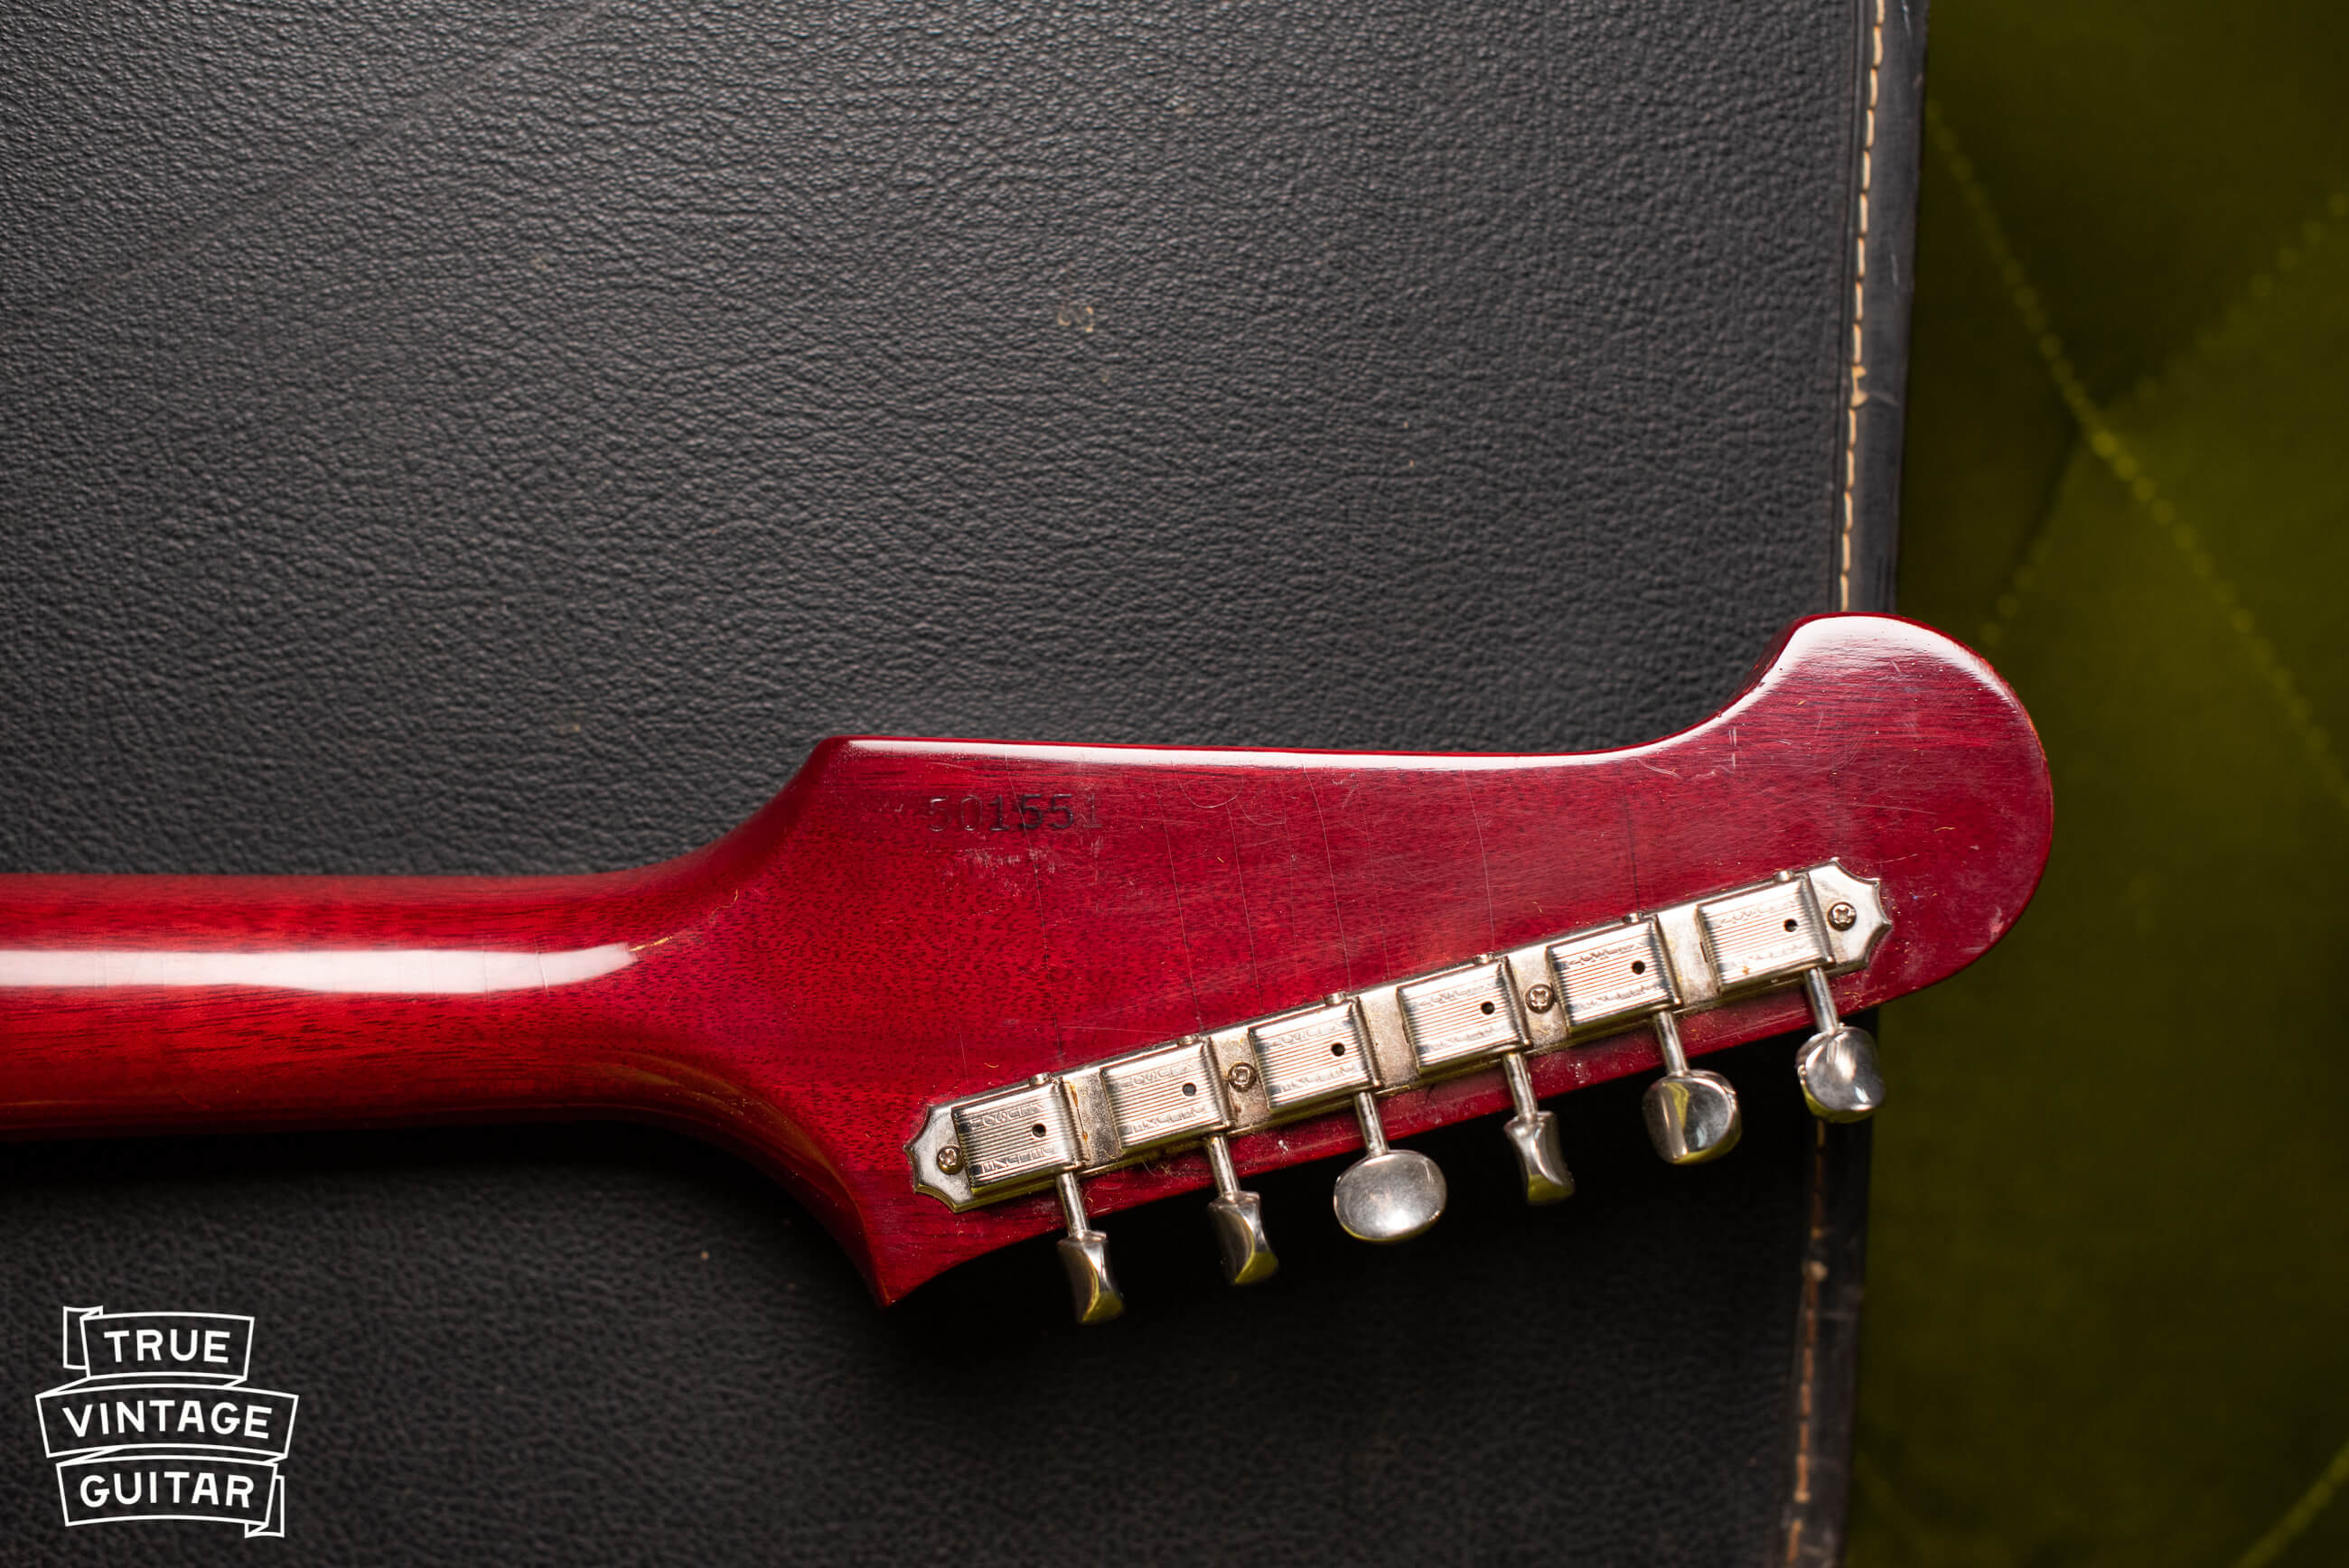 Gibson serial numbers pre-1975 for Firebird guitars